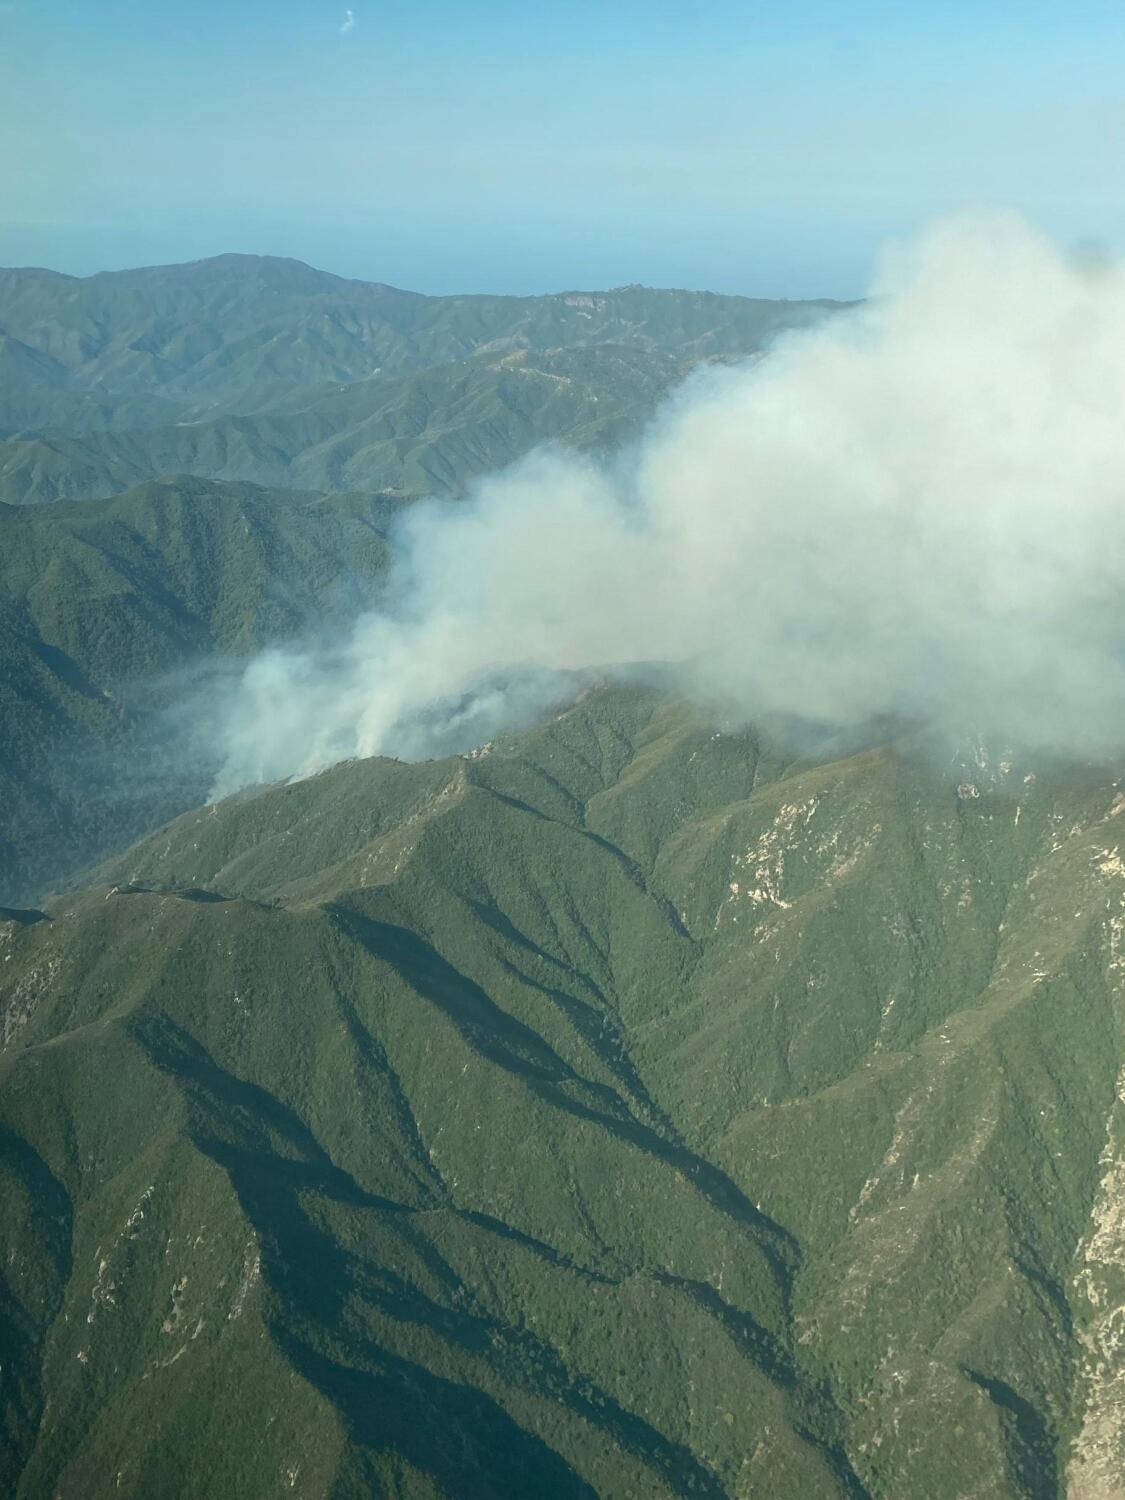 Brush fires erupt in California, forcing evacuations